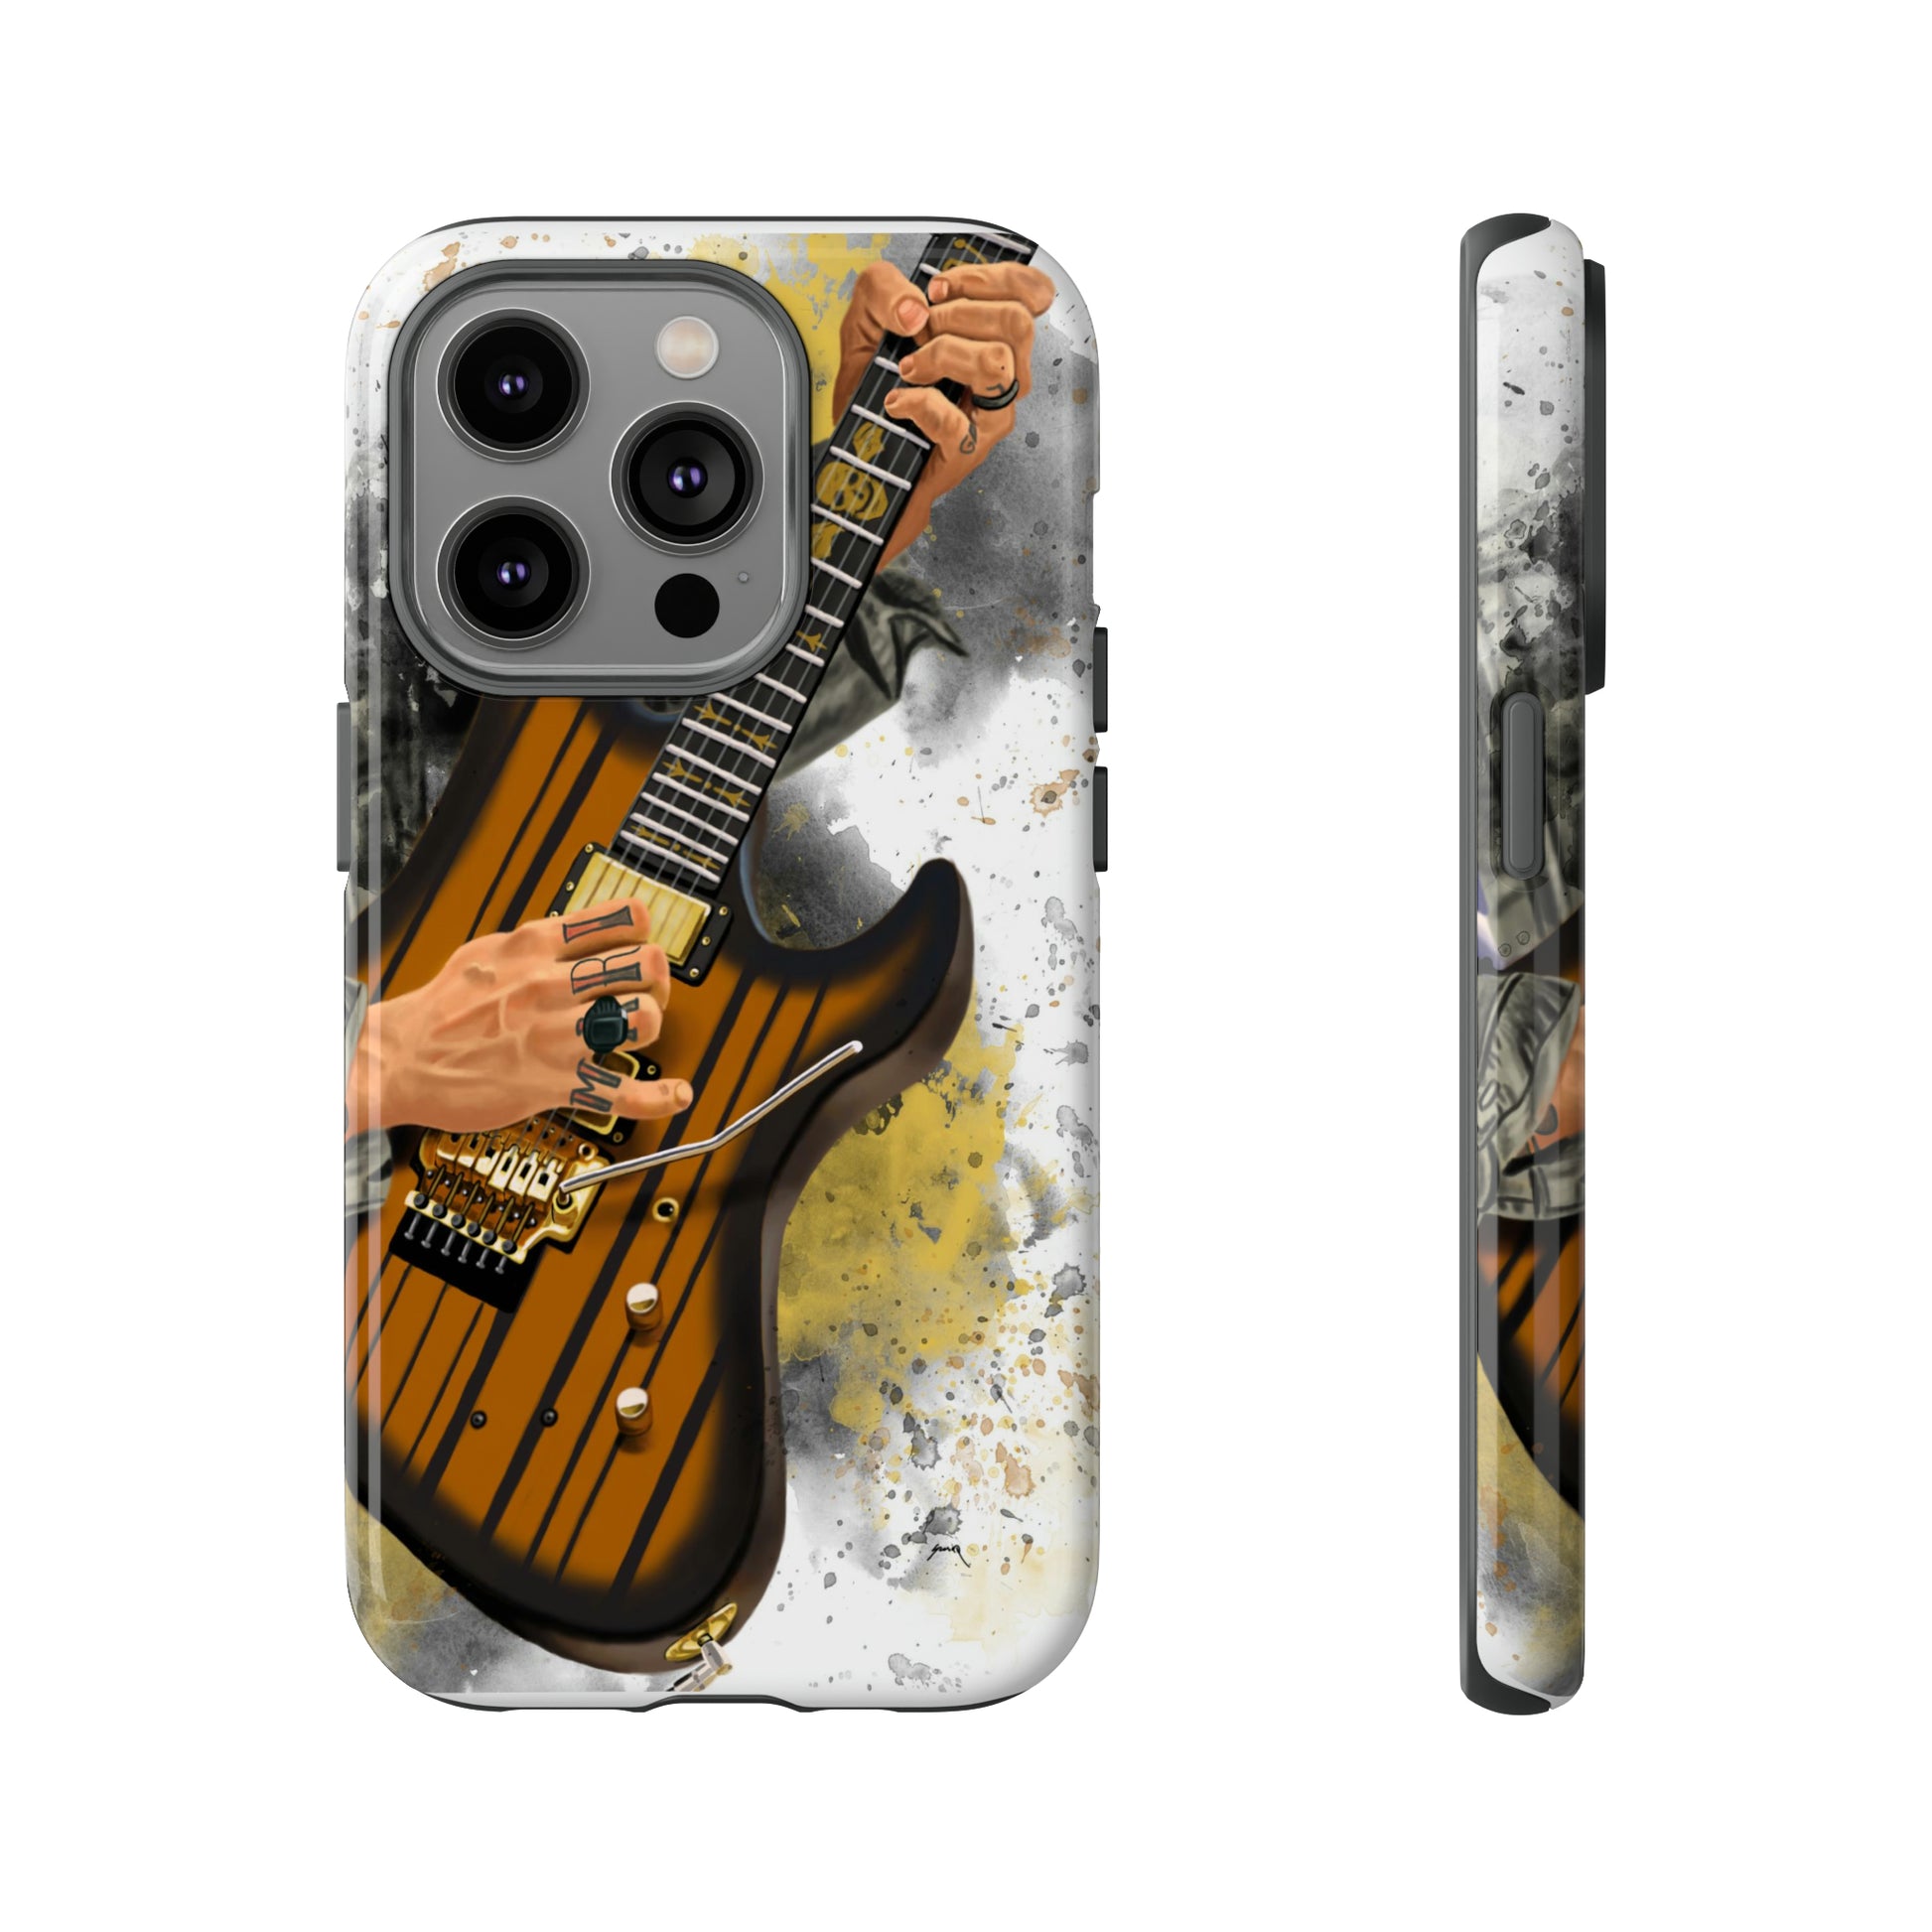 Digital painting of a burst black electric guitar with hands and tattoos printed on iphone tough case